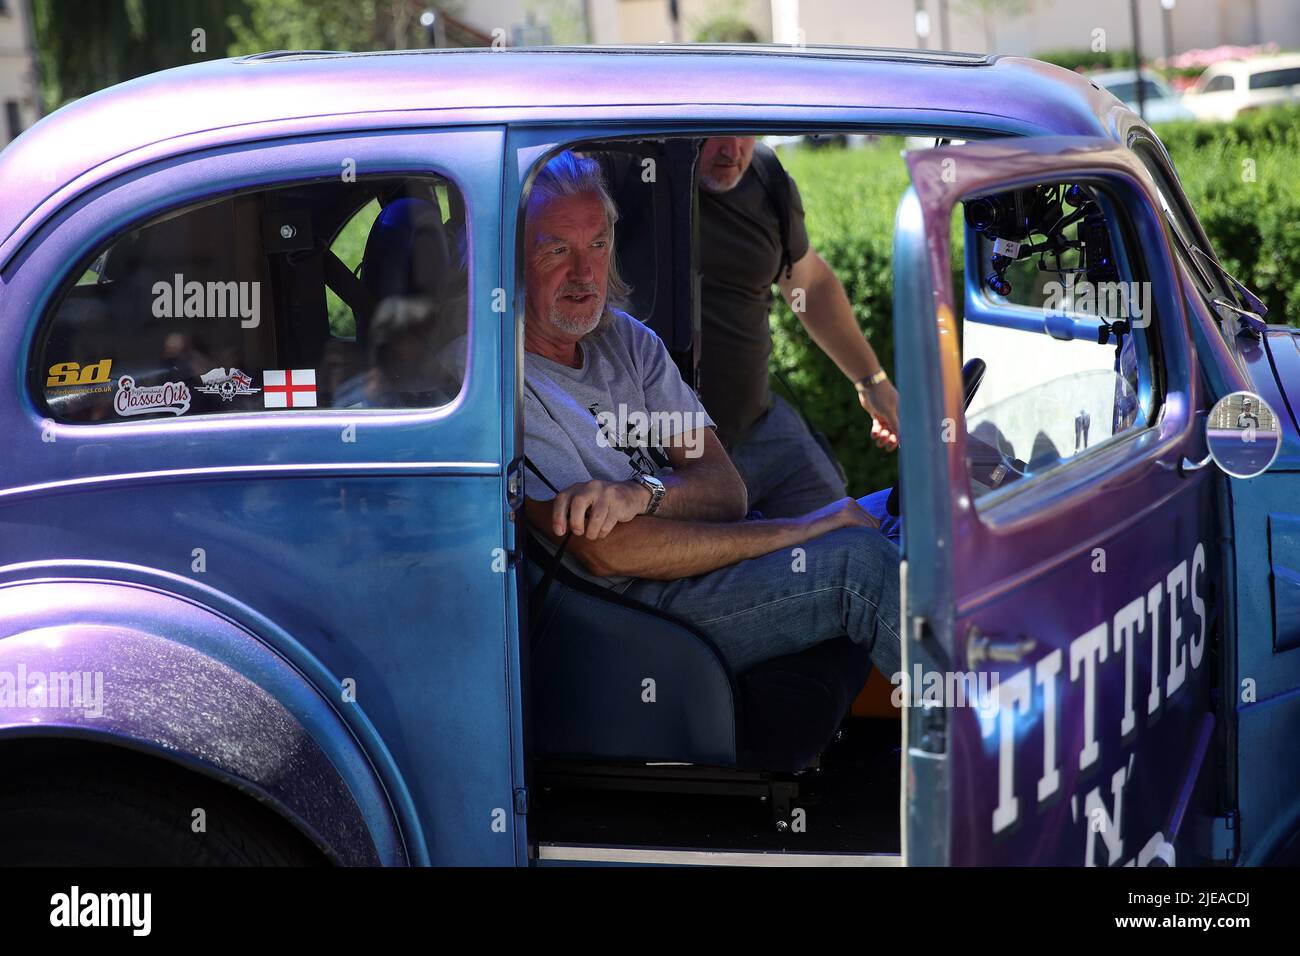 The Grand Tour star, Jeremy Clarkson, sits in a vintage car in Cracow, Poland, while on tour filming the show. The Grand Tour is a British motoring television series, created by Jeremy Clarkson, Richard Hammond, James May, and Andy Wilman, made for Amazon exclusively for its online streaming service Amazon Prime Video which premiered in 2016. The programme was conceived in the wake of the departure of Clarkson, Hammond, May and Wilman from the BBC series Top Gear. (Photo by Vito Corleone / SOPA Images/Sipa USA) Stock Photo